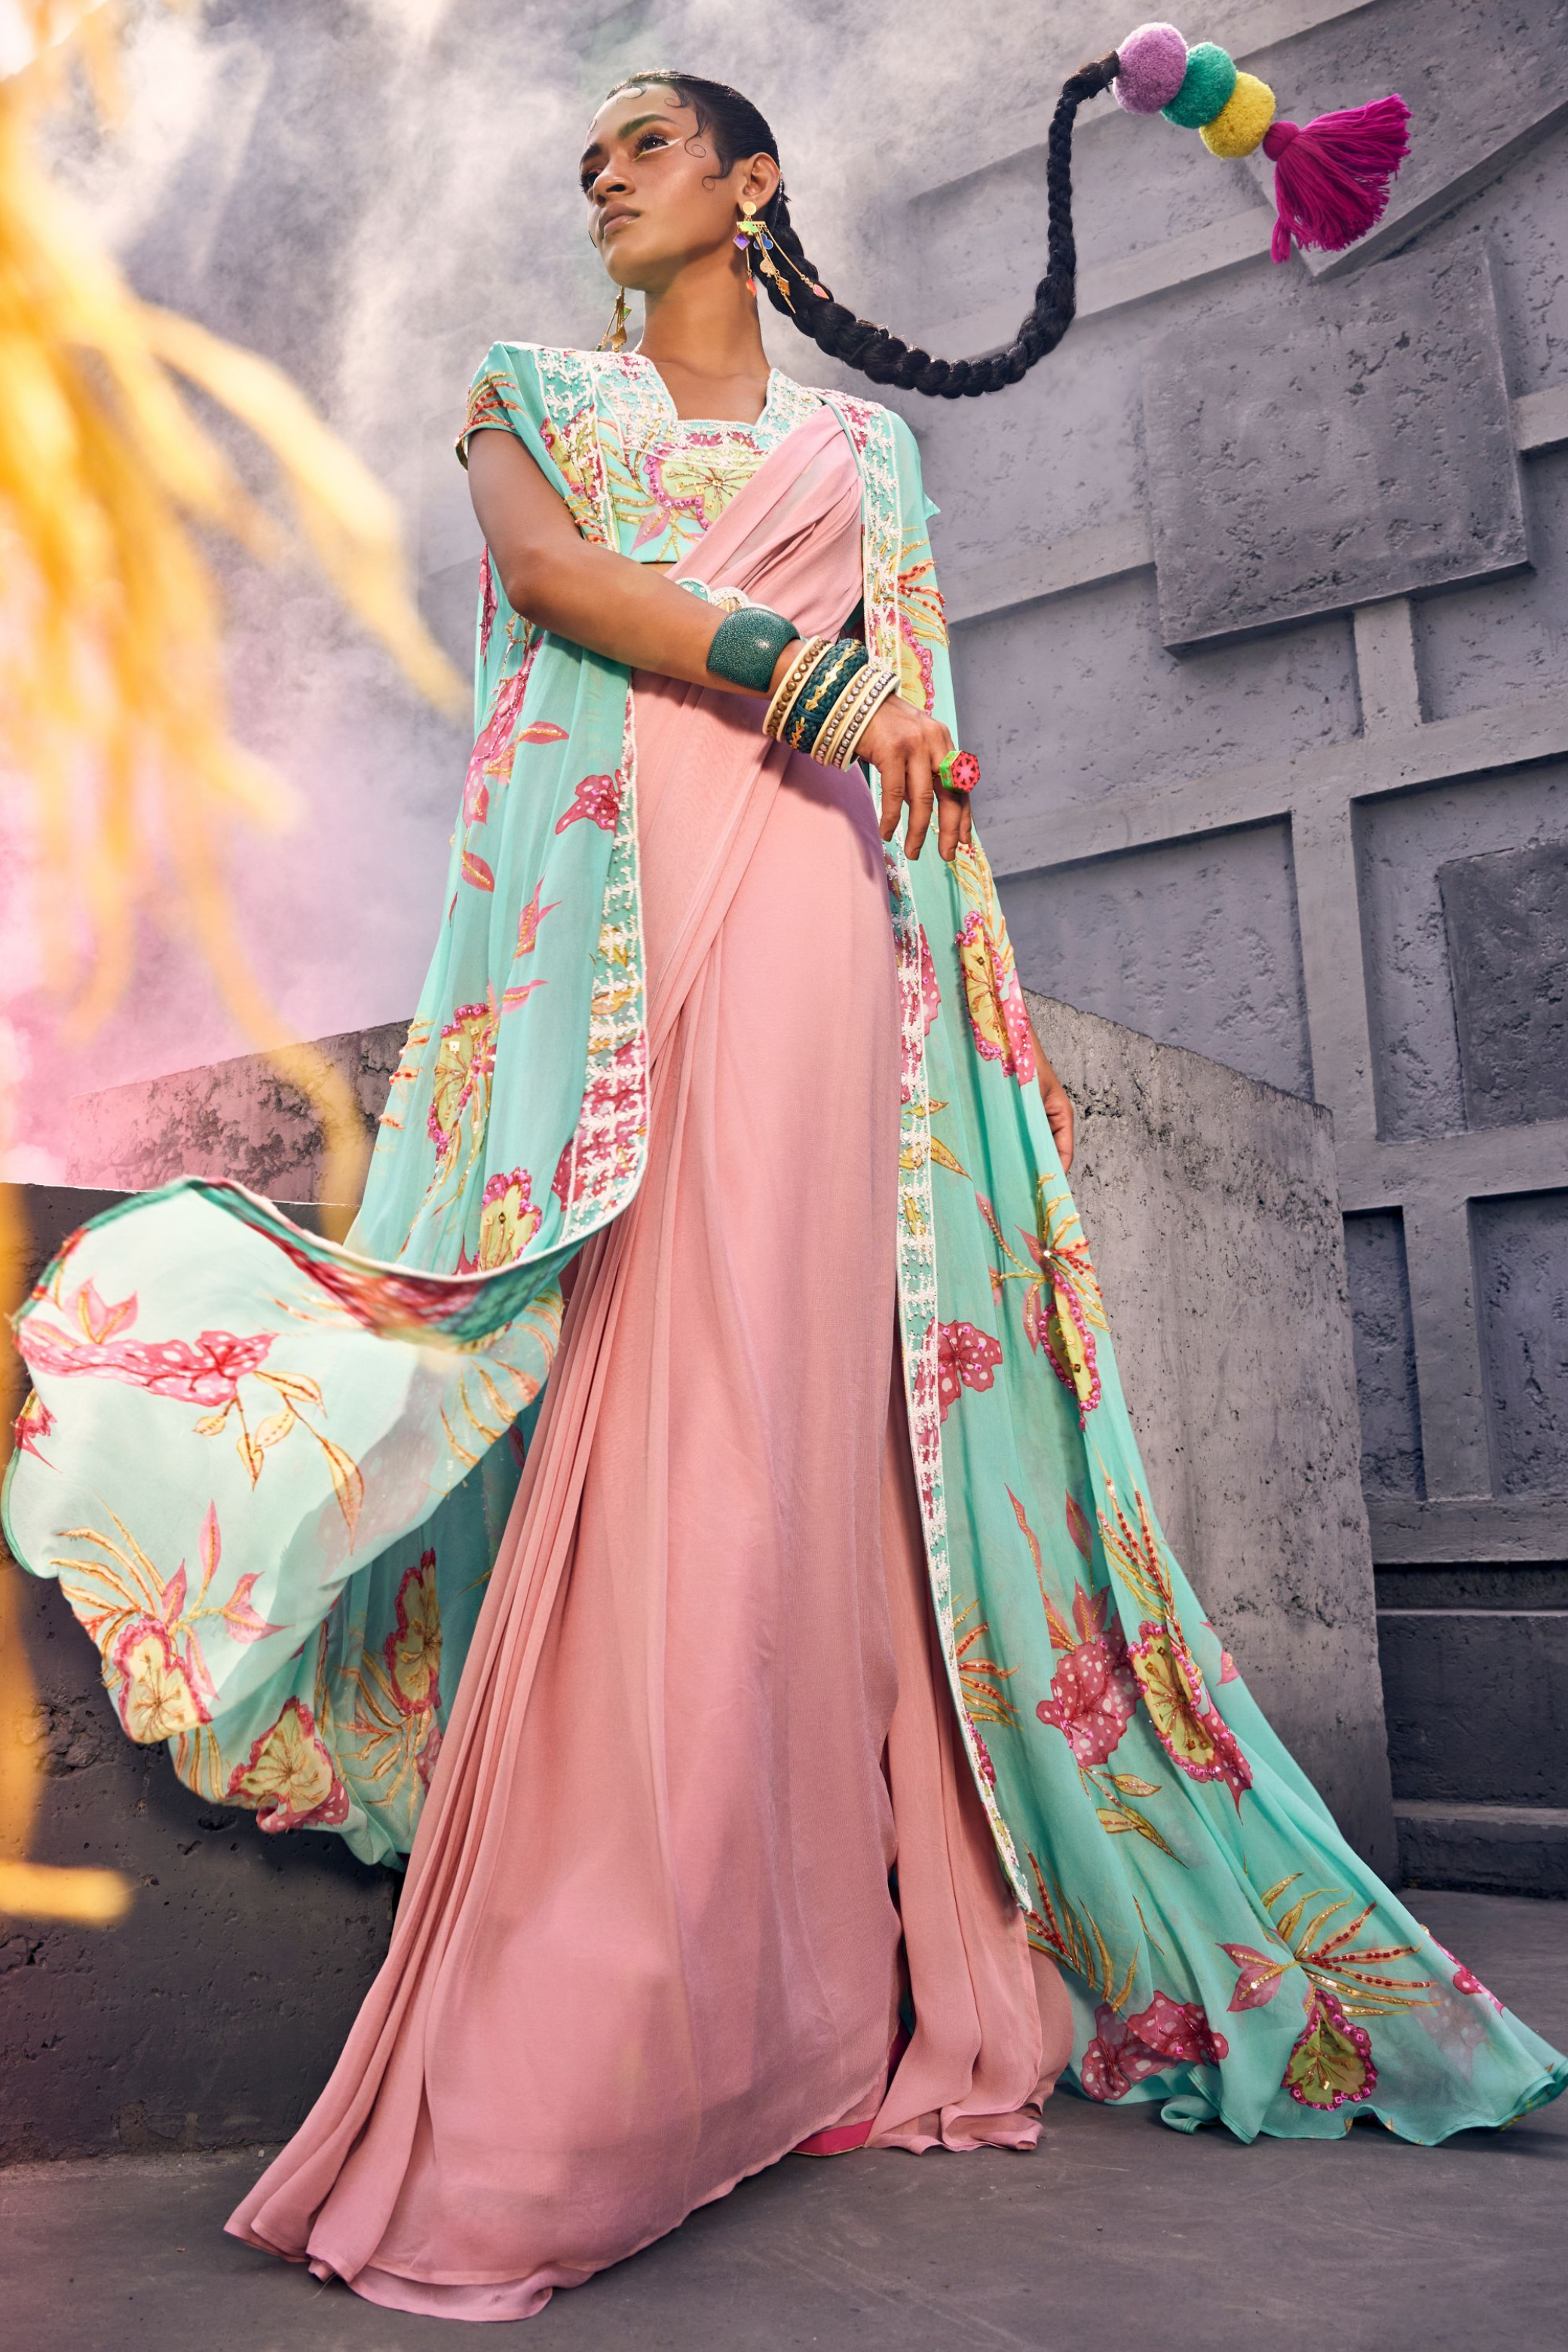 Drape Saree with Cape and Bustier